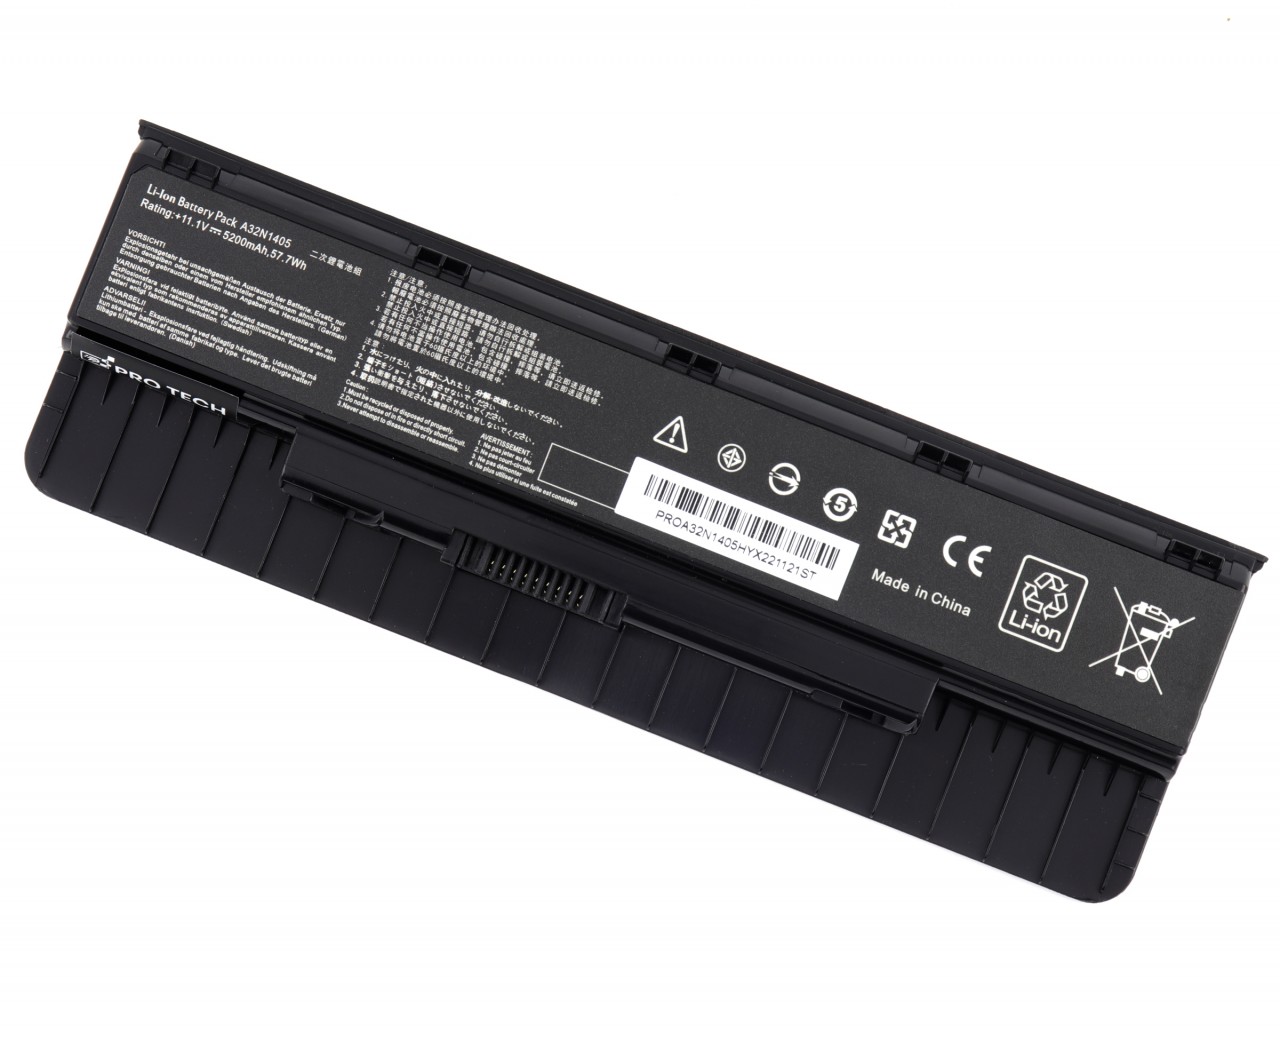 Baterie Asus N751JX 57.7Wh / 5200mAh Protech High Quality Replacement